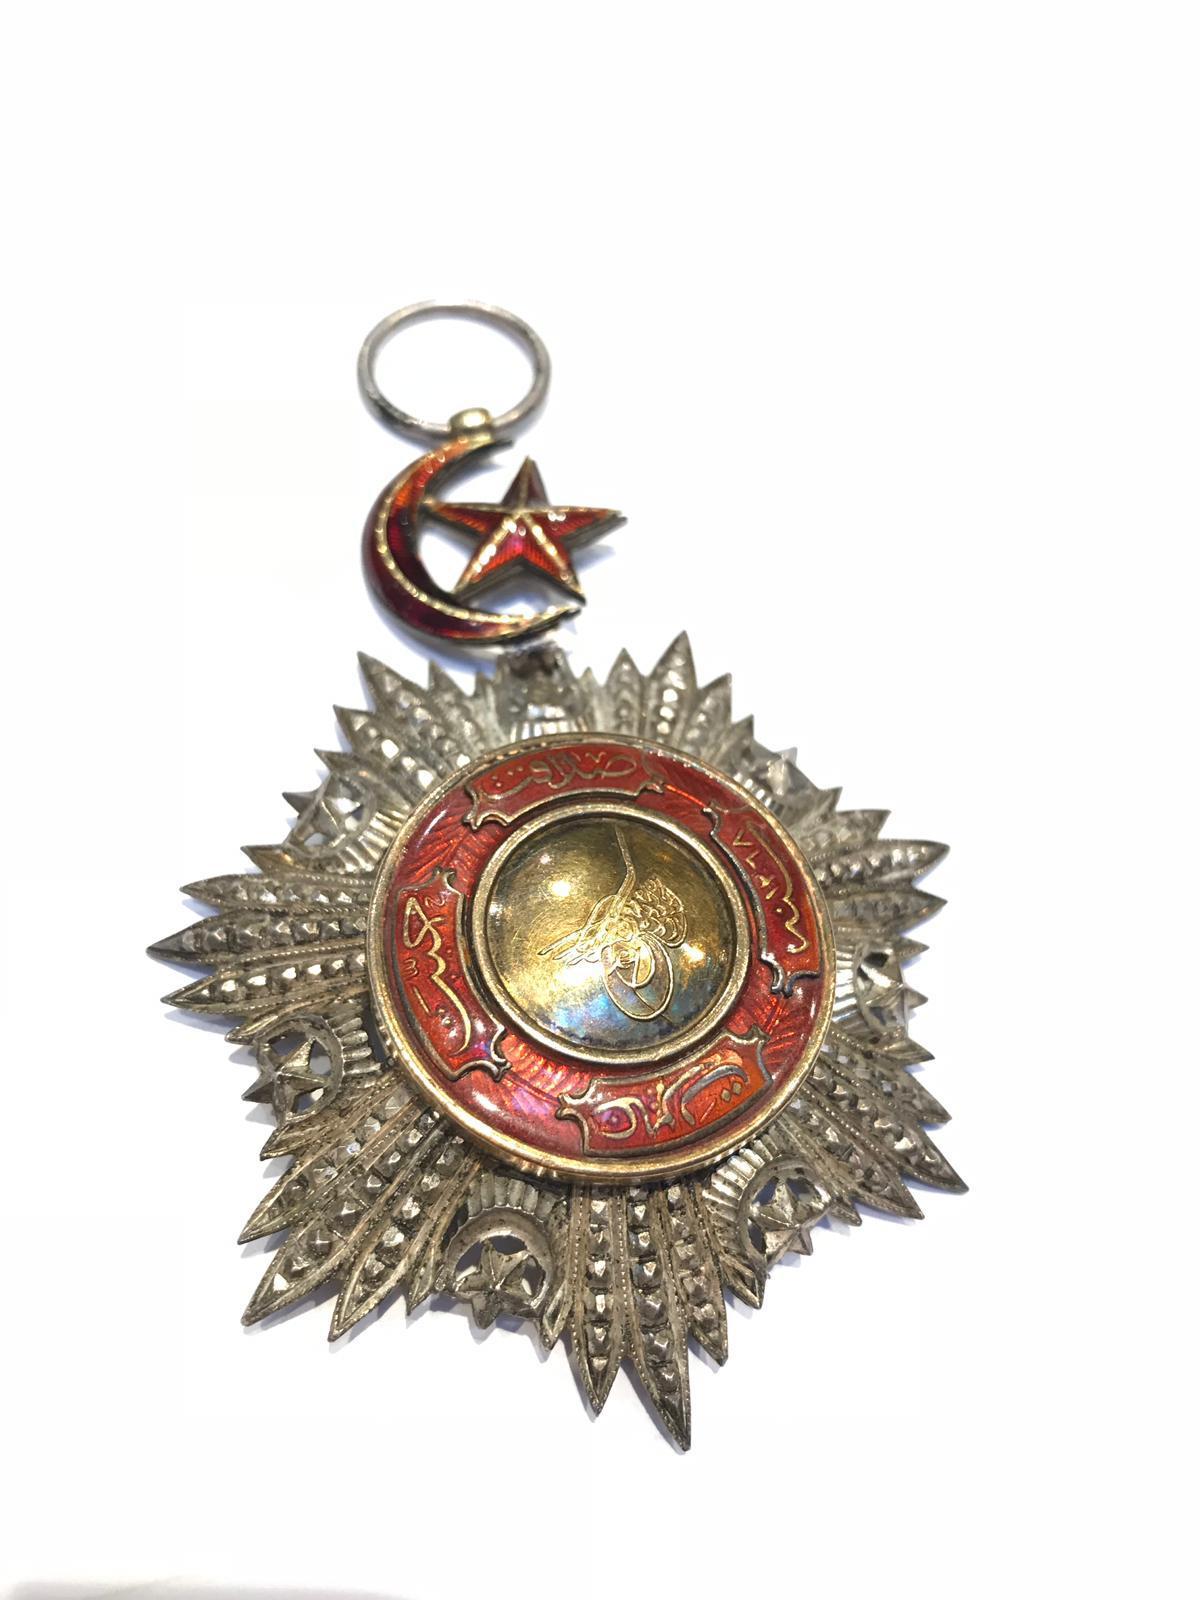 ottoman medals and orders